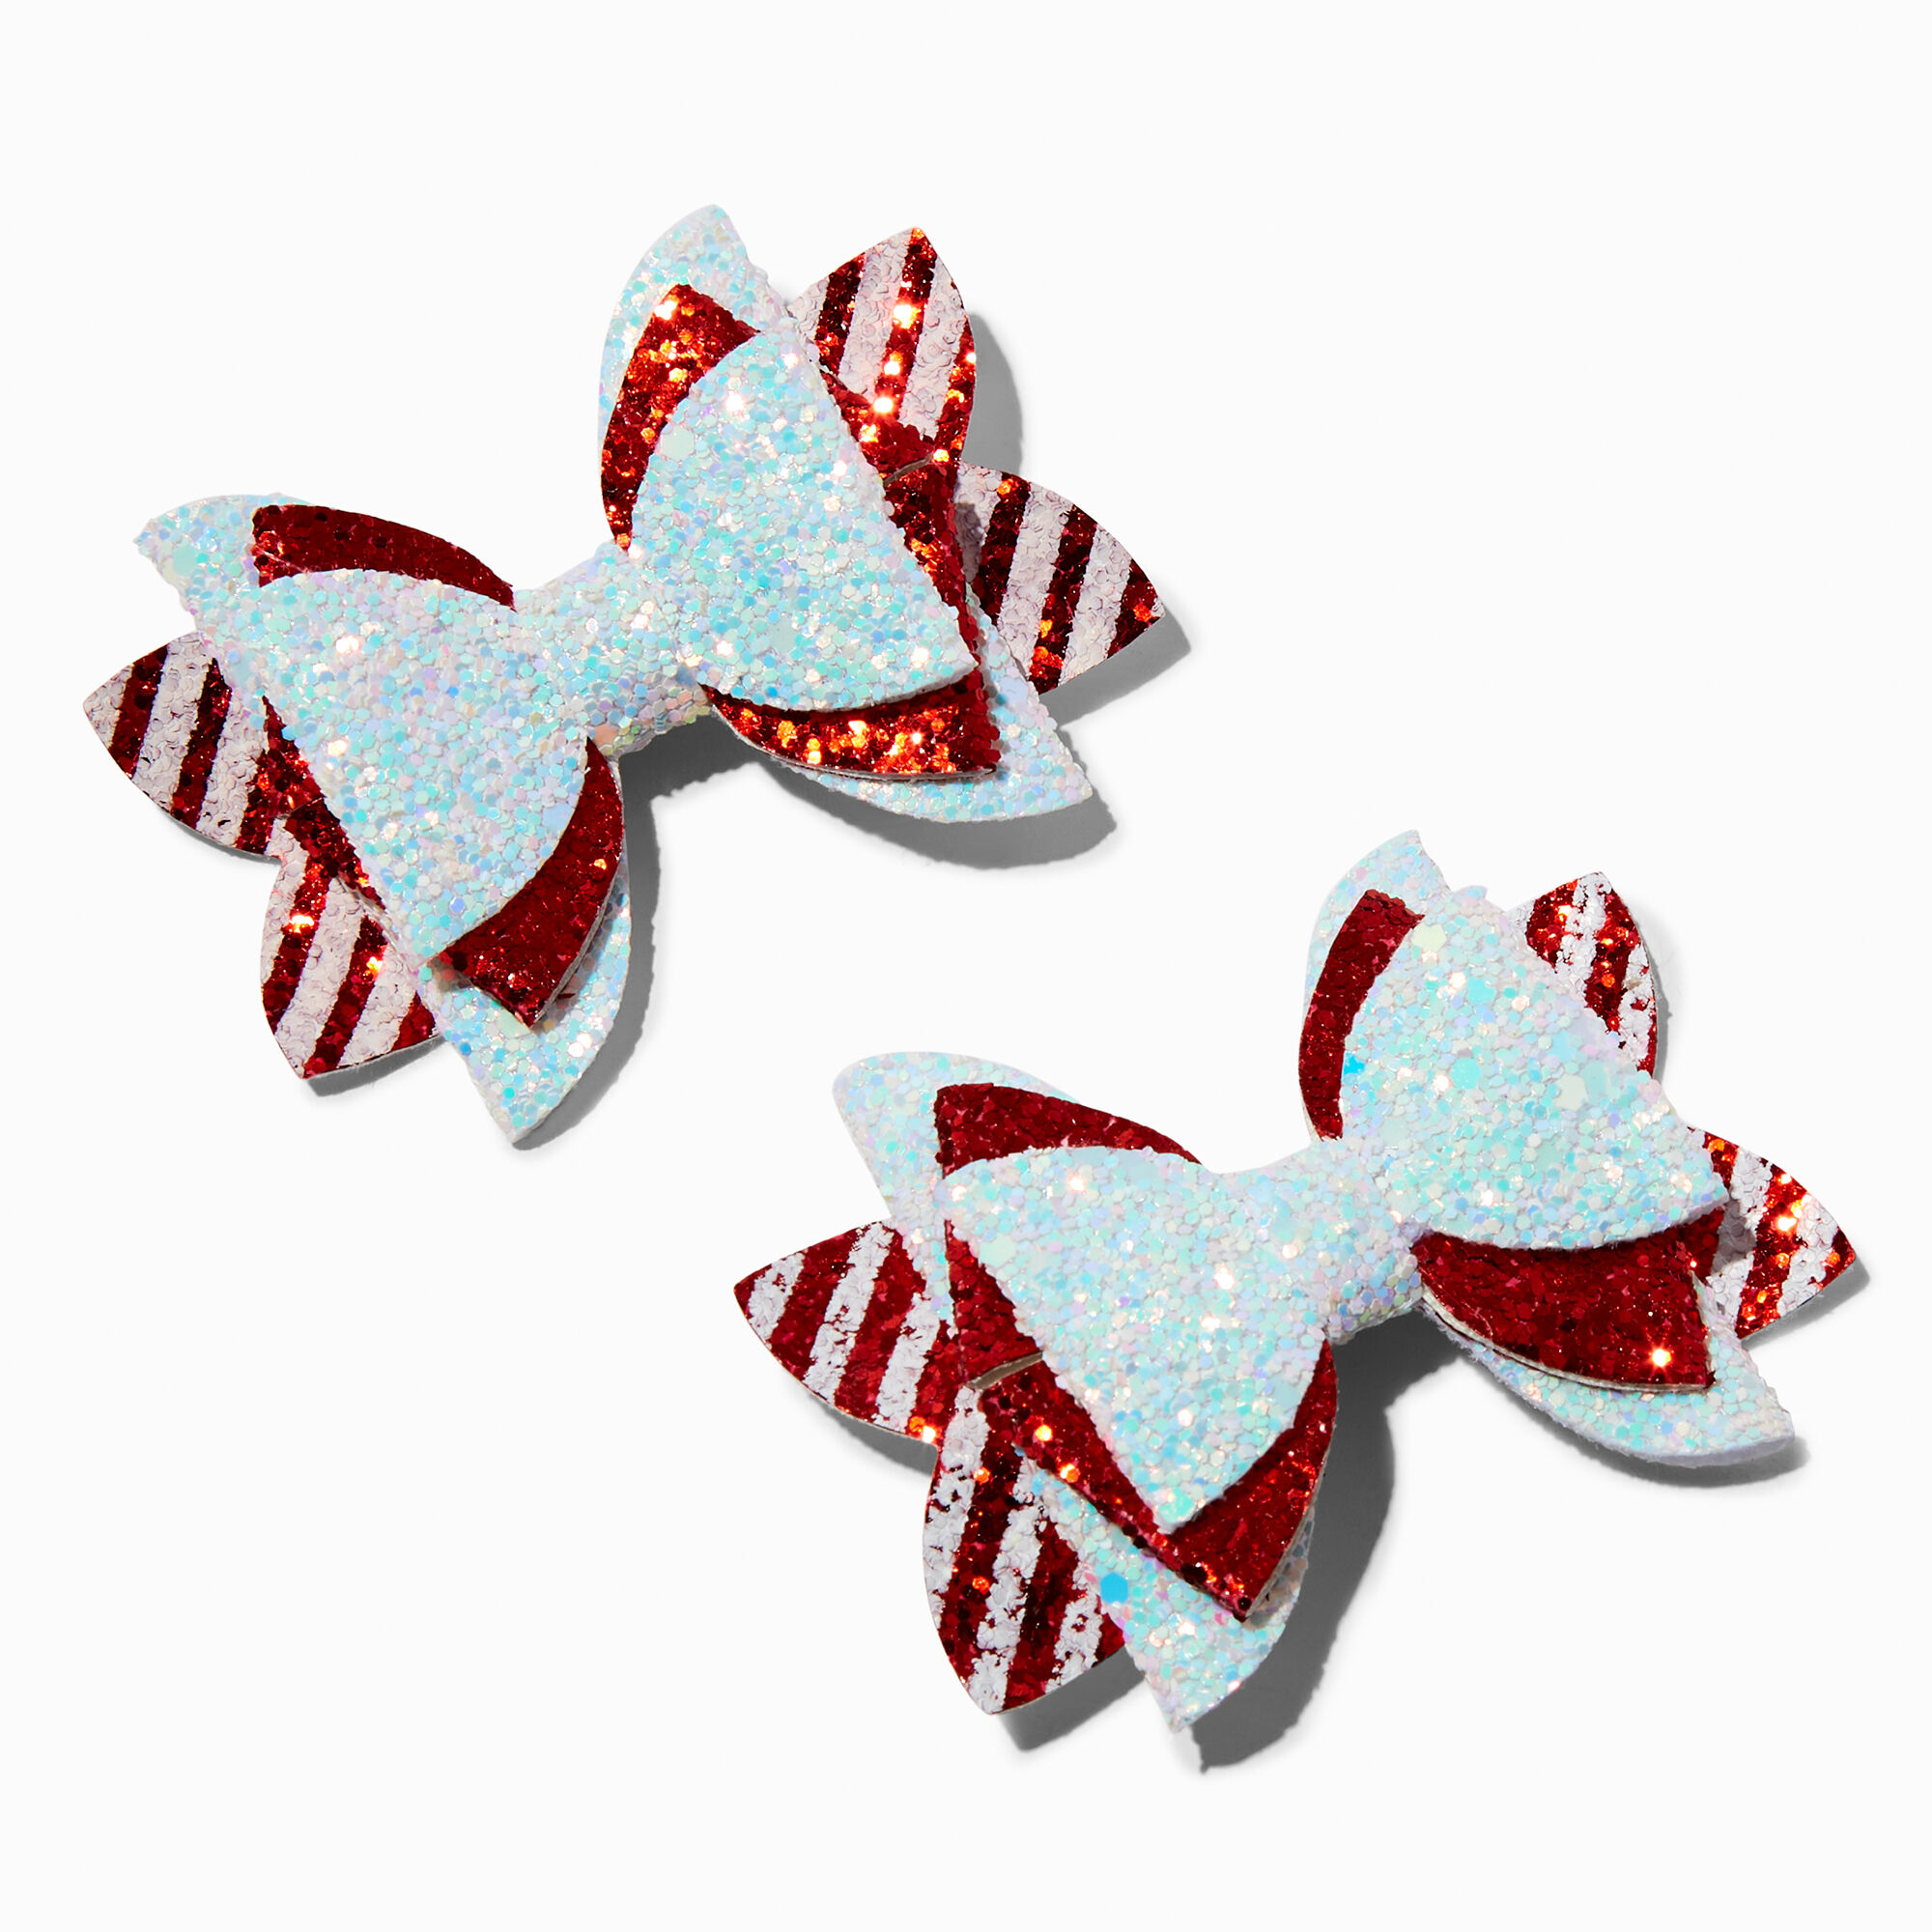 View Claires Candy Cane Stripe Glittery Hair Bow Clips 2 Pack information